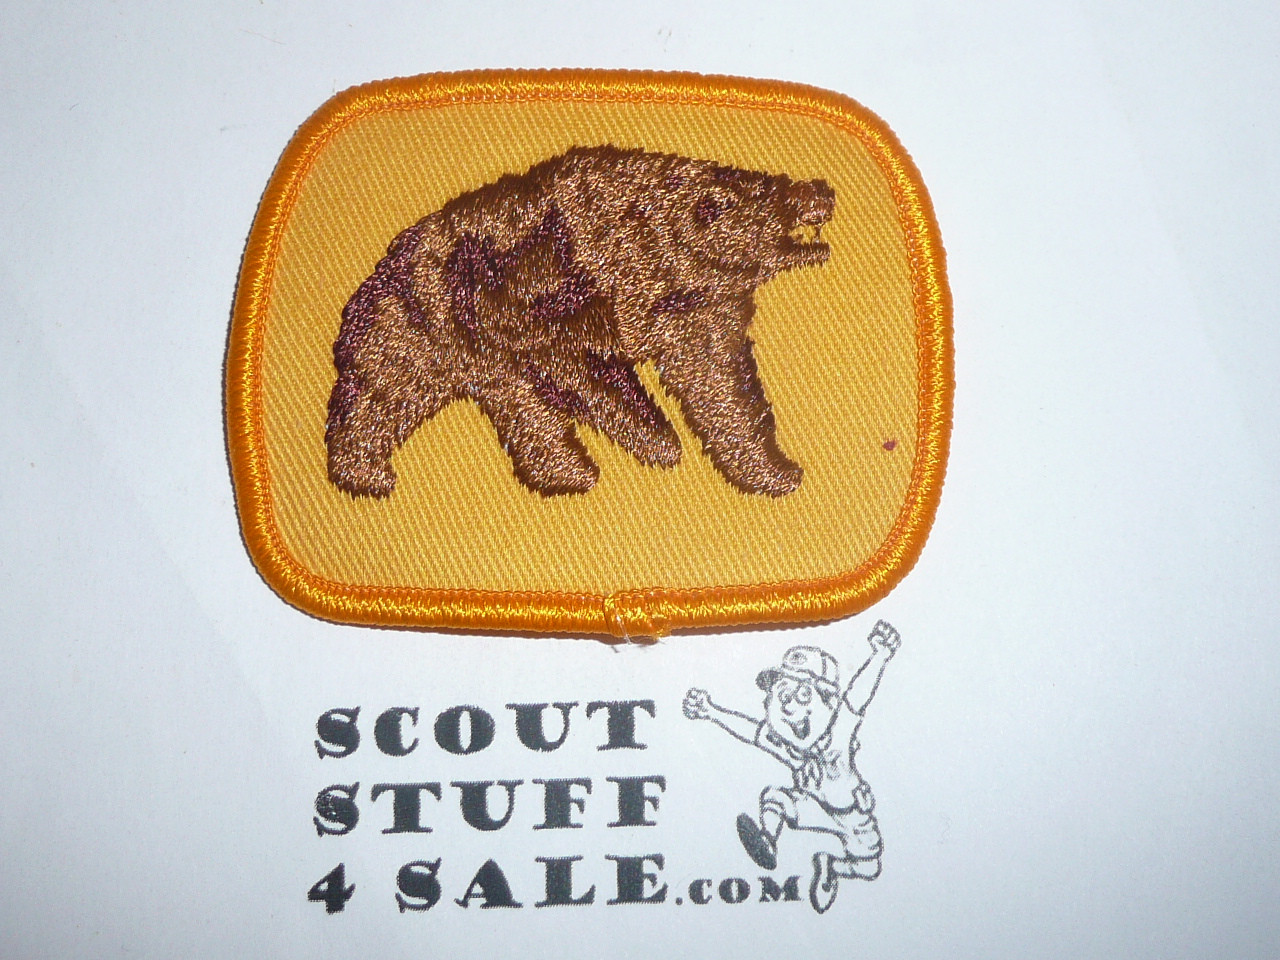 Bear Patrol Patch, Canadian, also used by Wood Badge Patrols